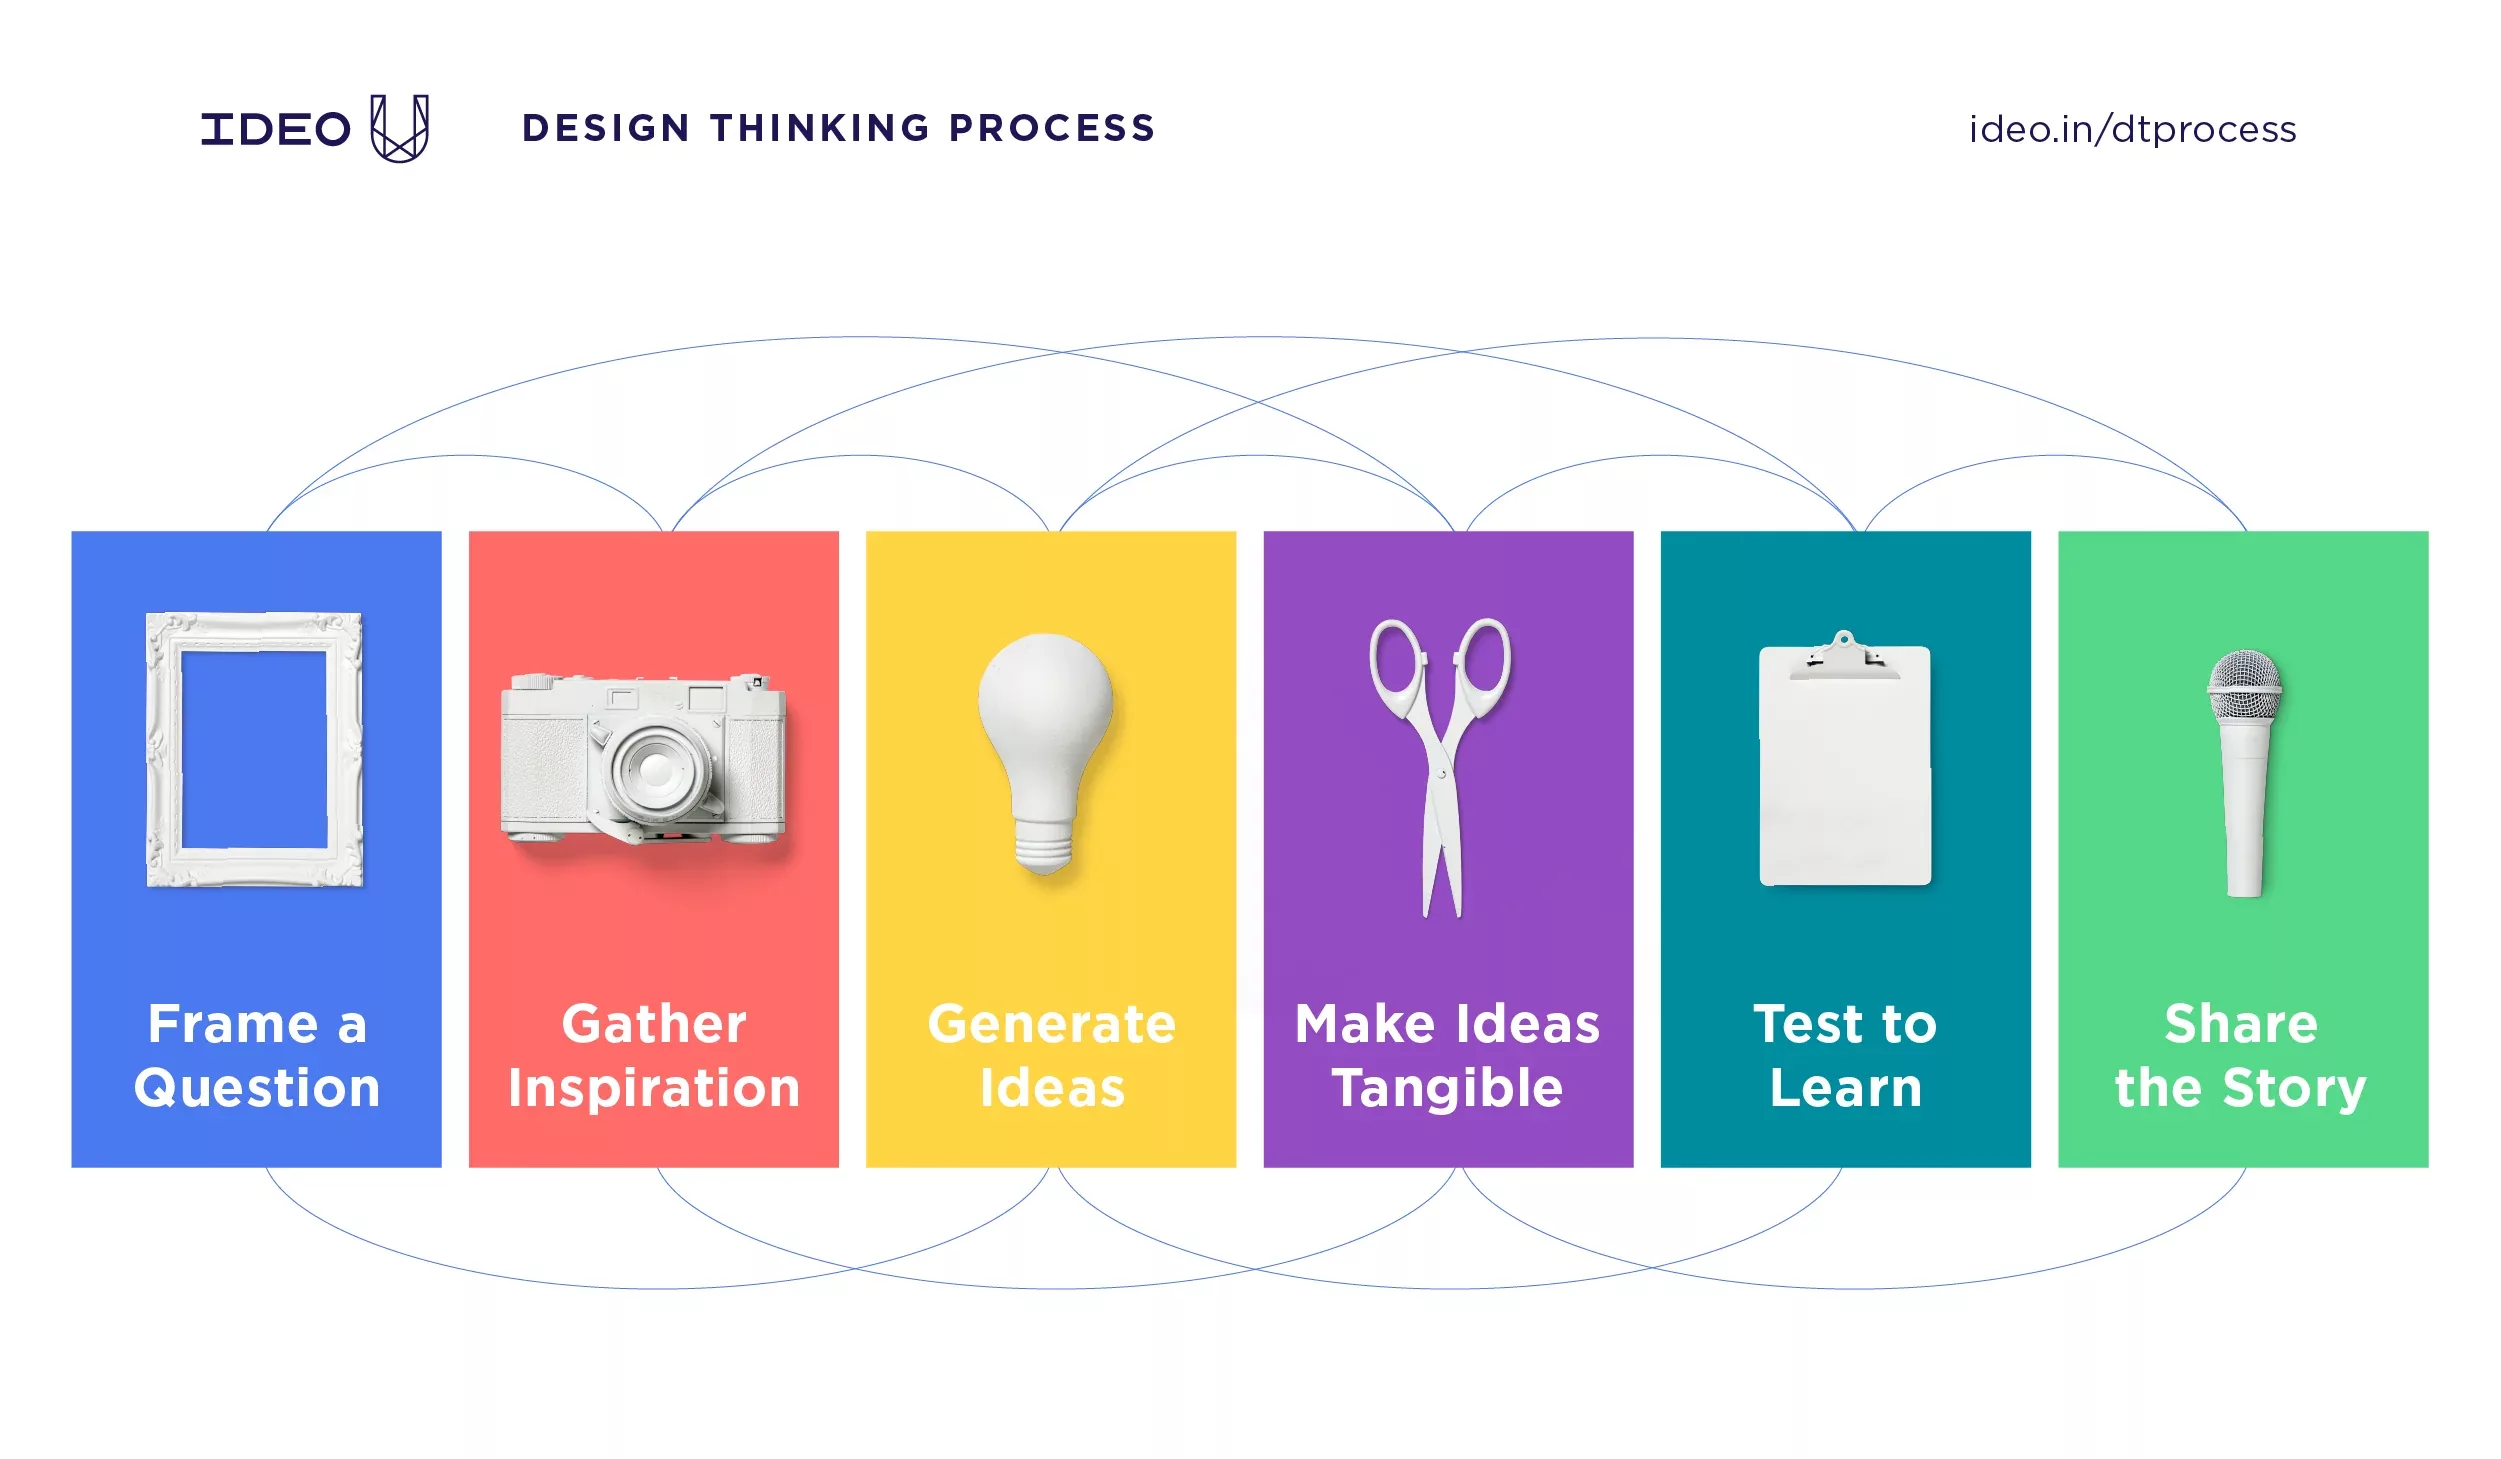 IDEO's designing thinking process that involves 5 stages: Frame a question, gather inspiration, generate ideas, make ideas tangible, test to learn and share the story.